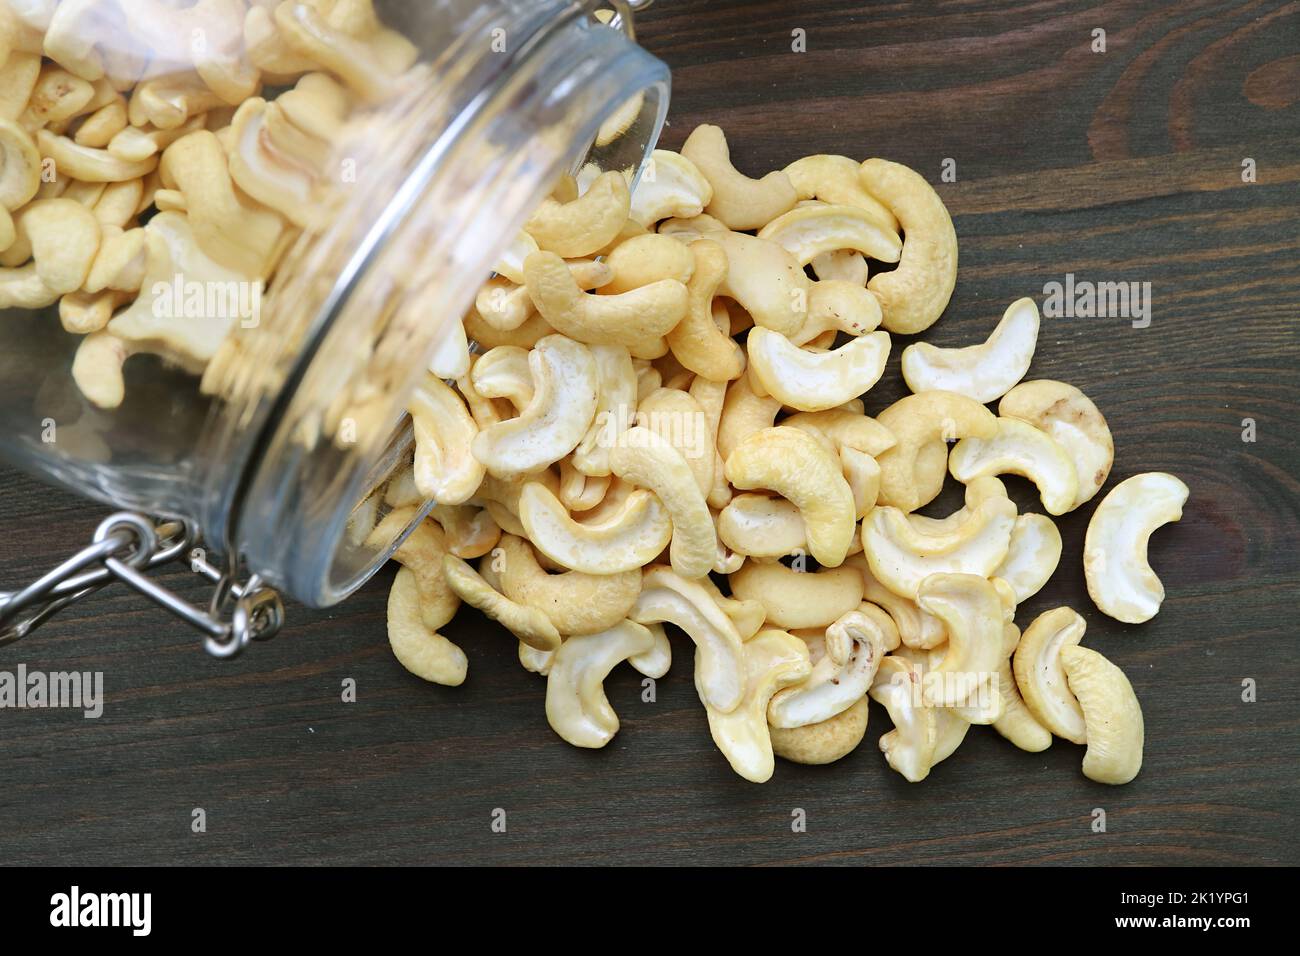 Heap of Casshew Nuts Scattered from a Glass Jar on Wooden Table Stock Photo